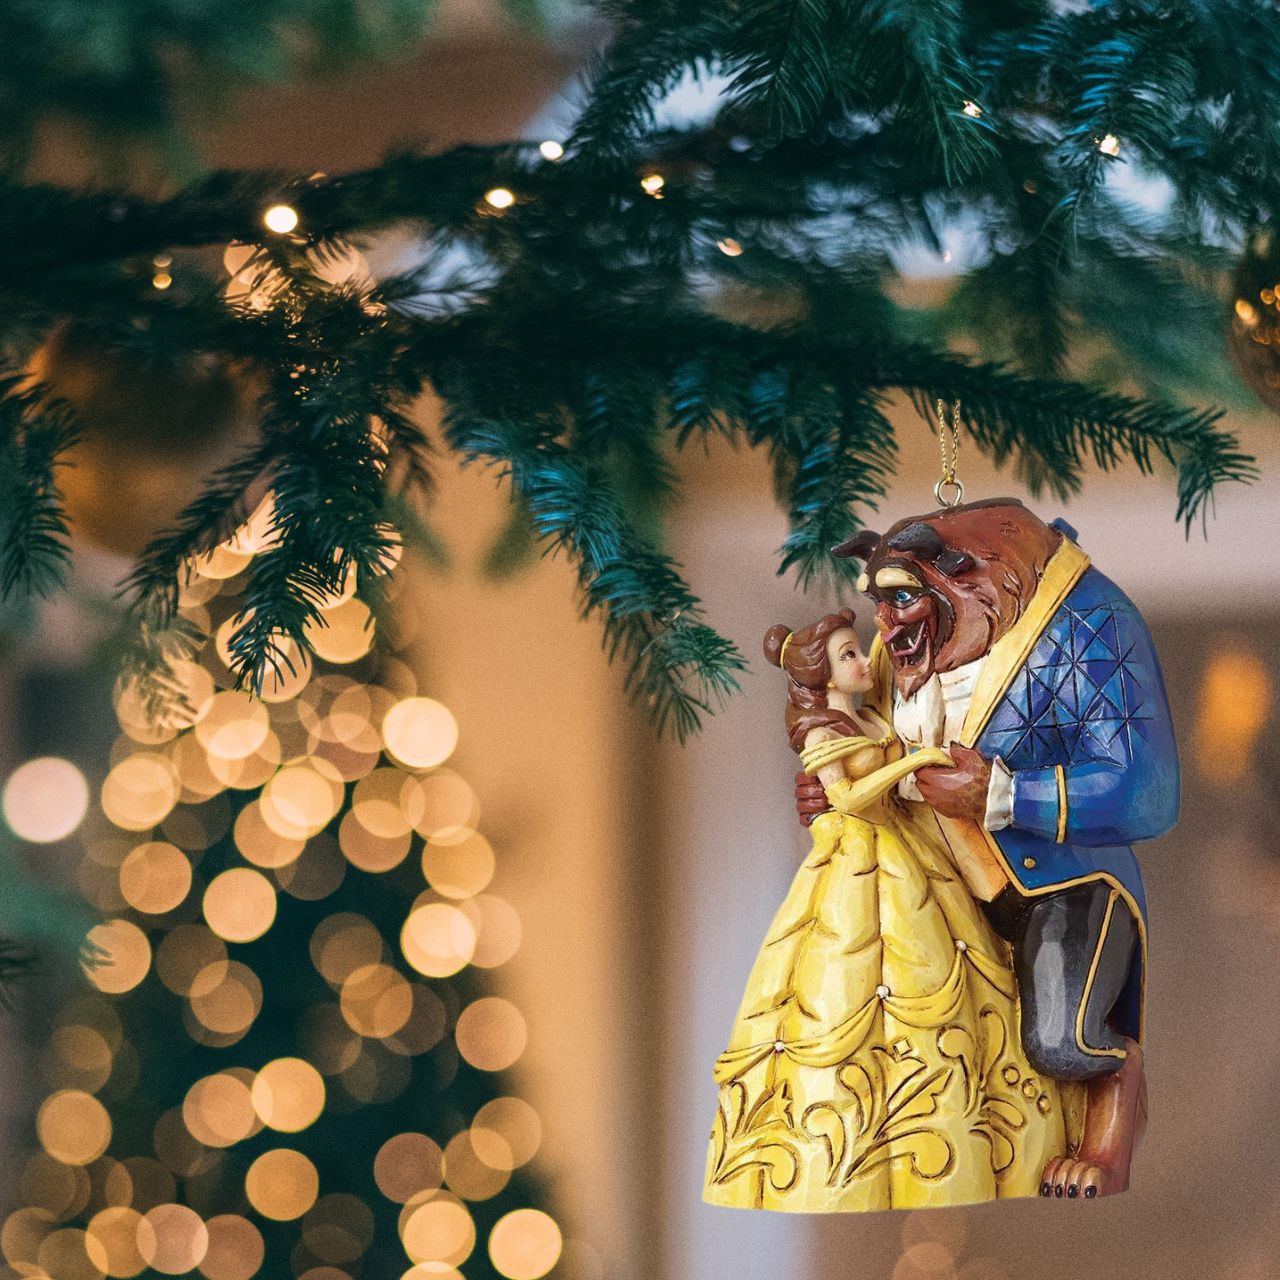 Disney Beauty and The Beast Hanging Ornament  This Beauty & The Beast cast stone hanging ornament is sure to add Disney's magic and romance to your Christmas tree. Bestseller.